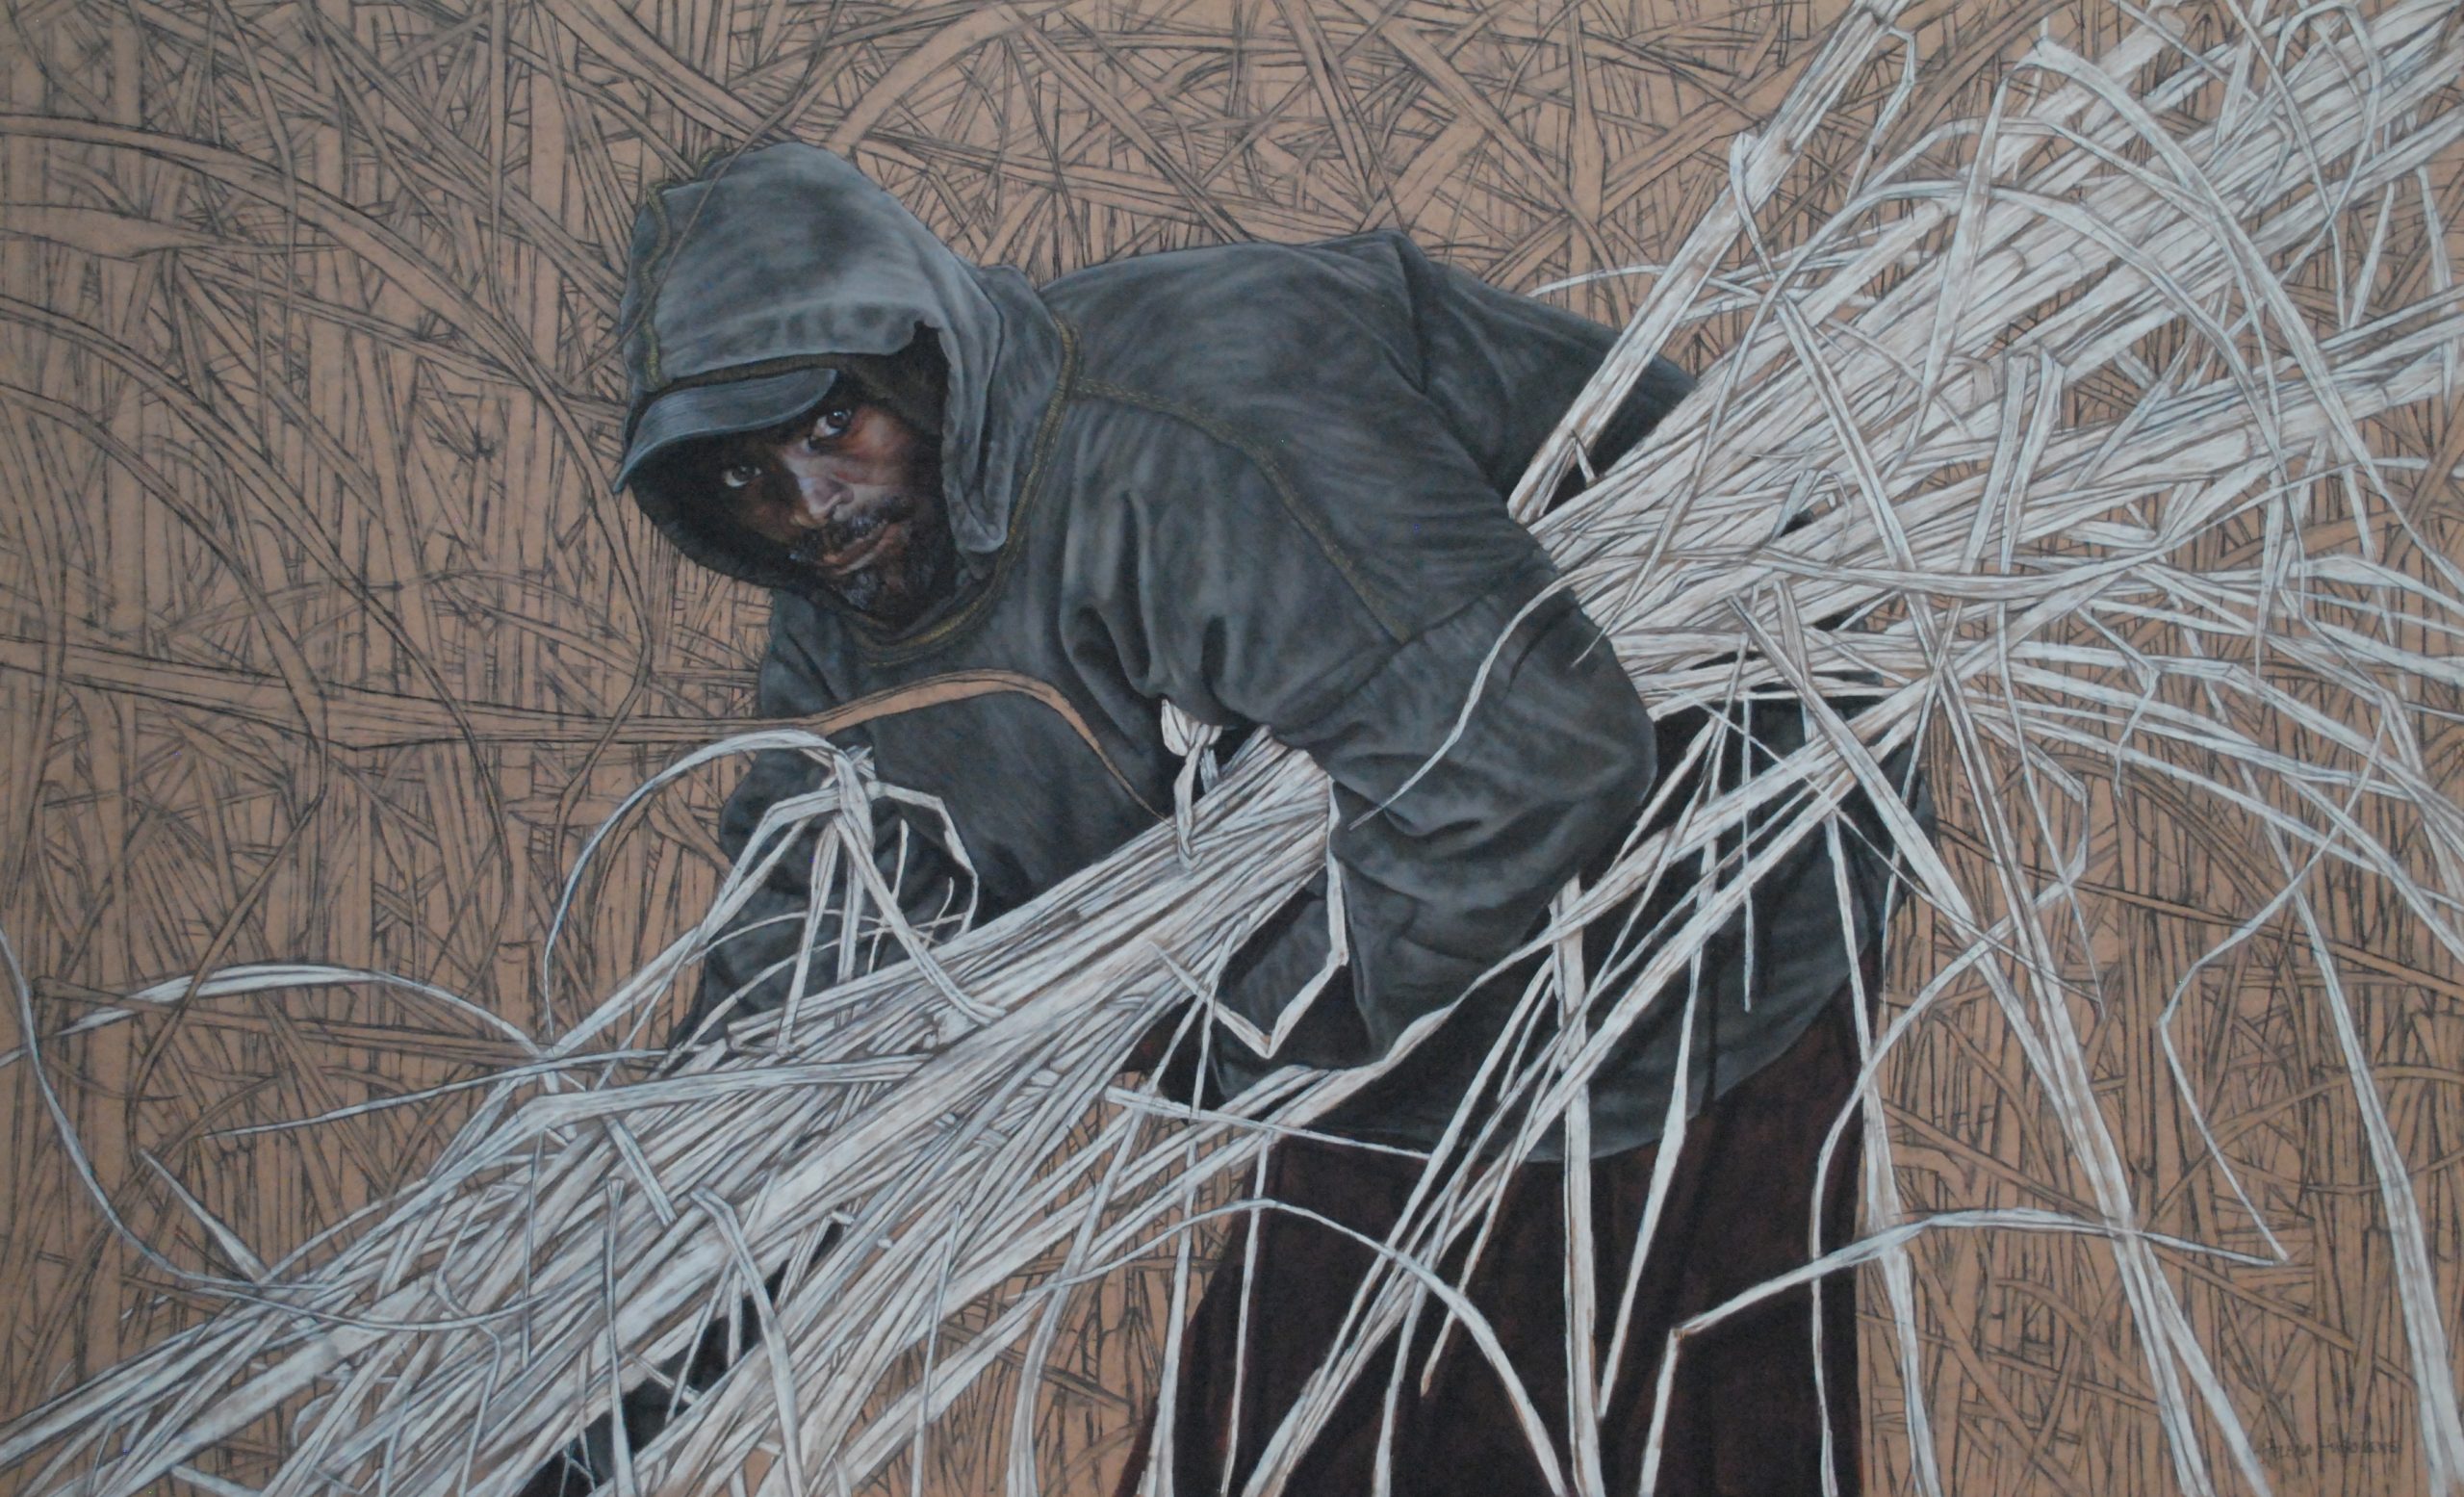 Reaping the Harvest II

122cm x 80cm

Pastel and charcoal on board